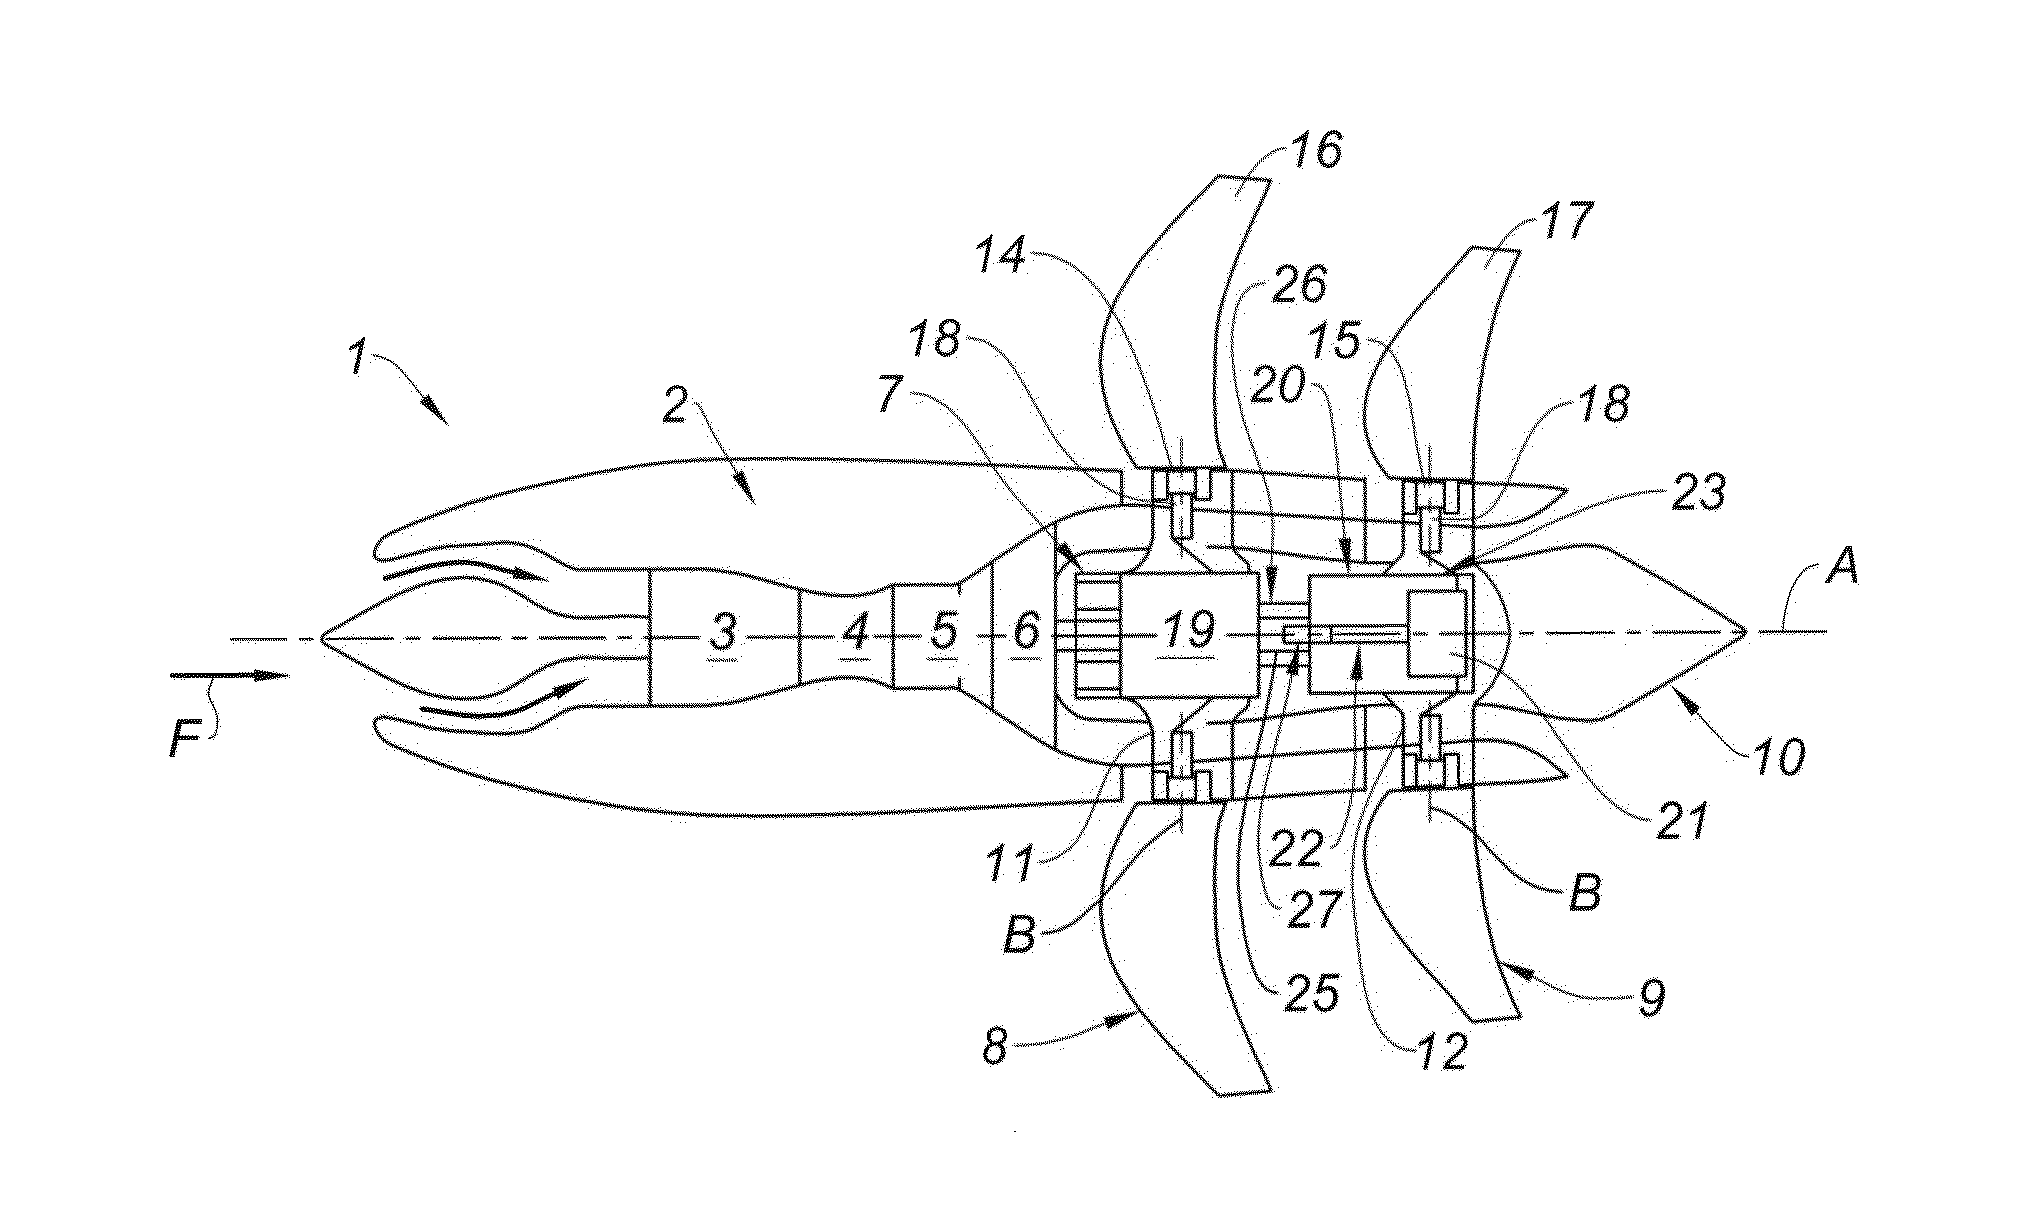 Device for the blind coupling of fluidic, electrical or similar supplies, to a receiving control mechanism